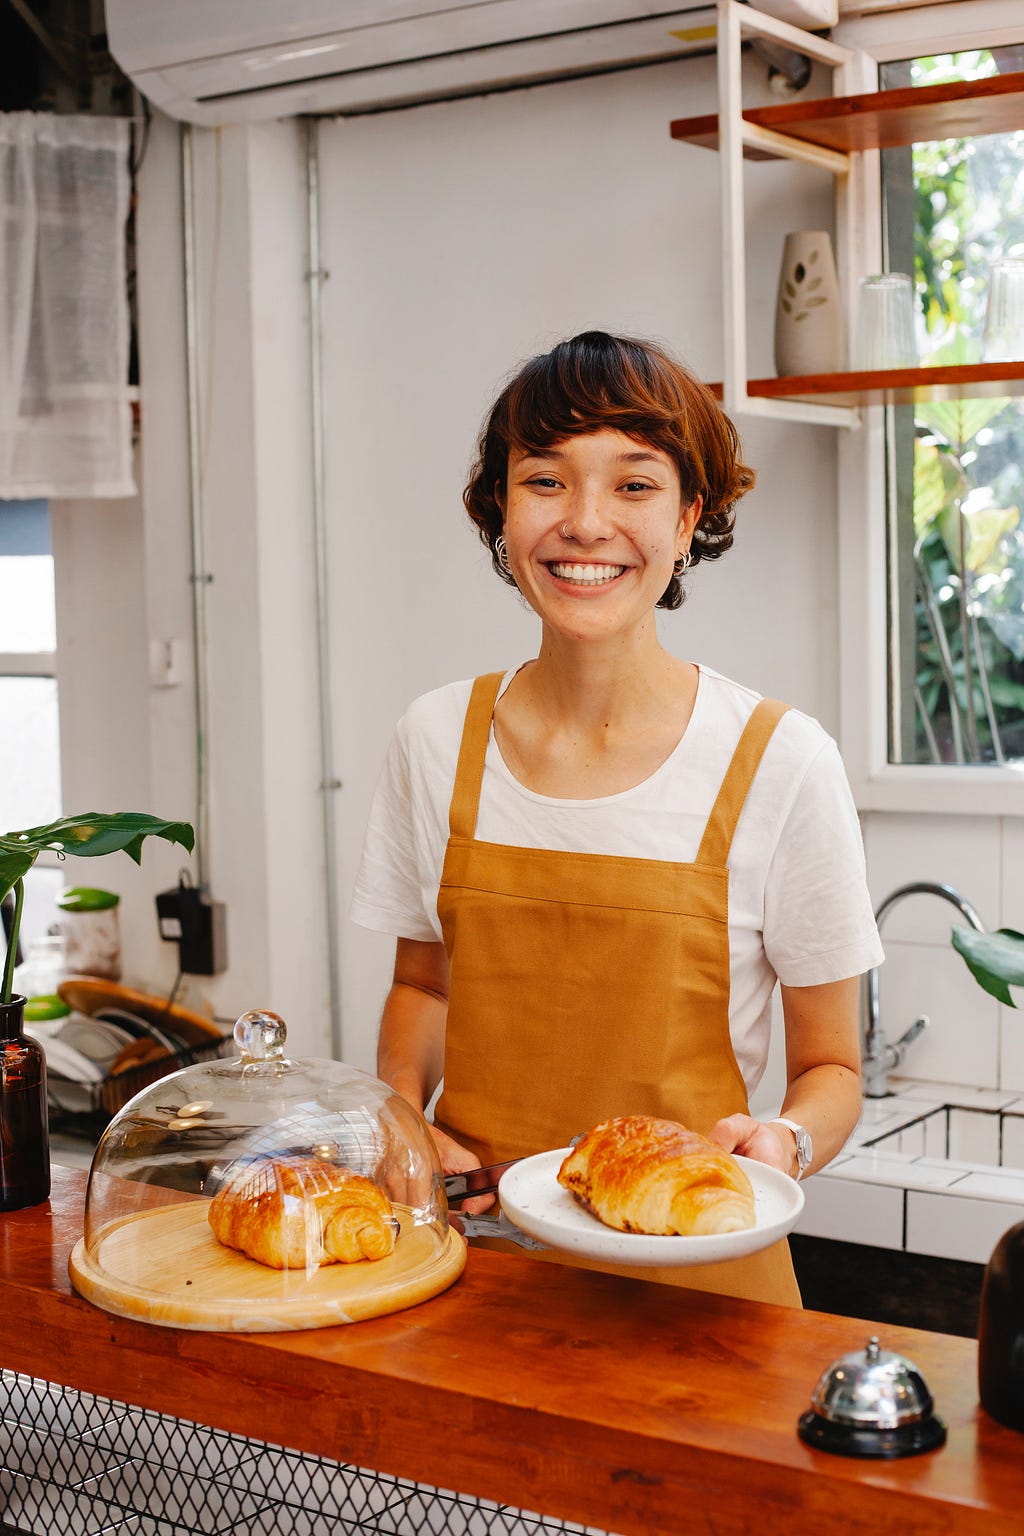 Smiling woman in an orange apron stands behind a wooden counter at what appears to be a bakery. Croissants line the counter. An open window is behind her to the right, a door to the left. White background with plants visible in the room.